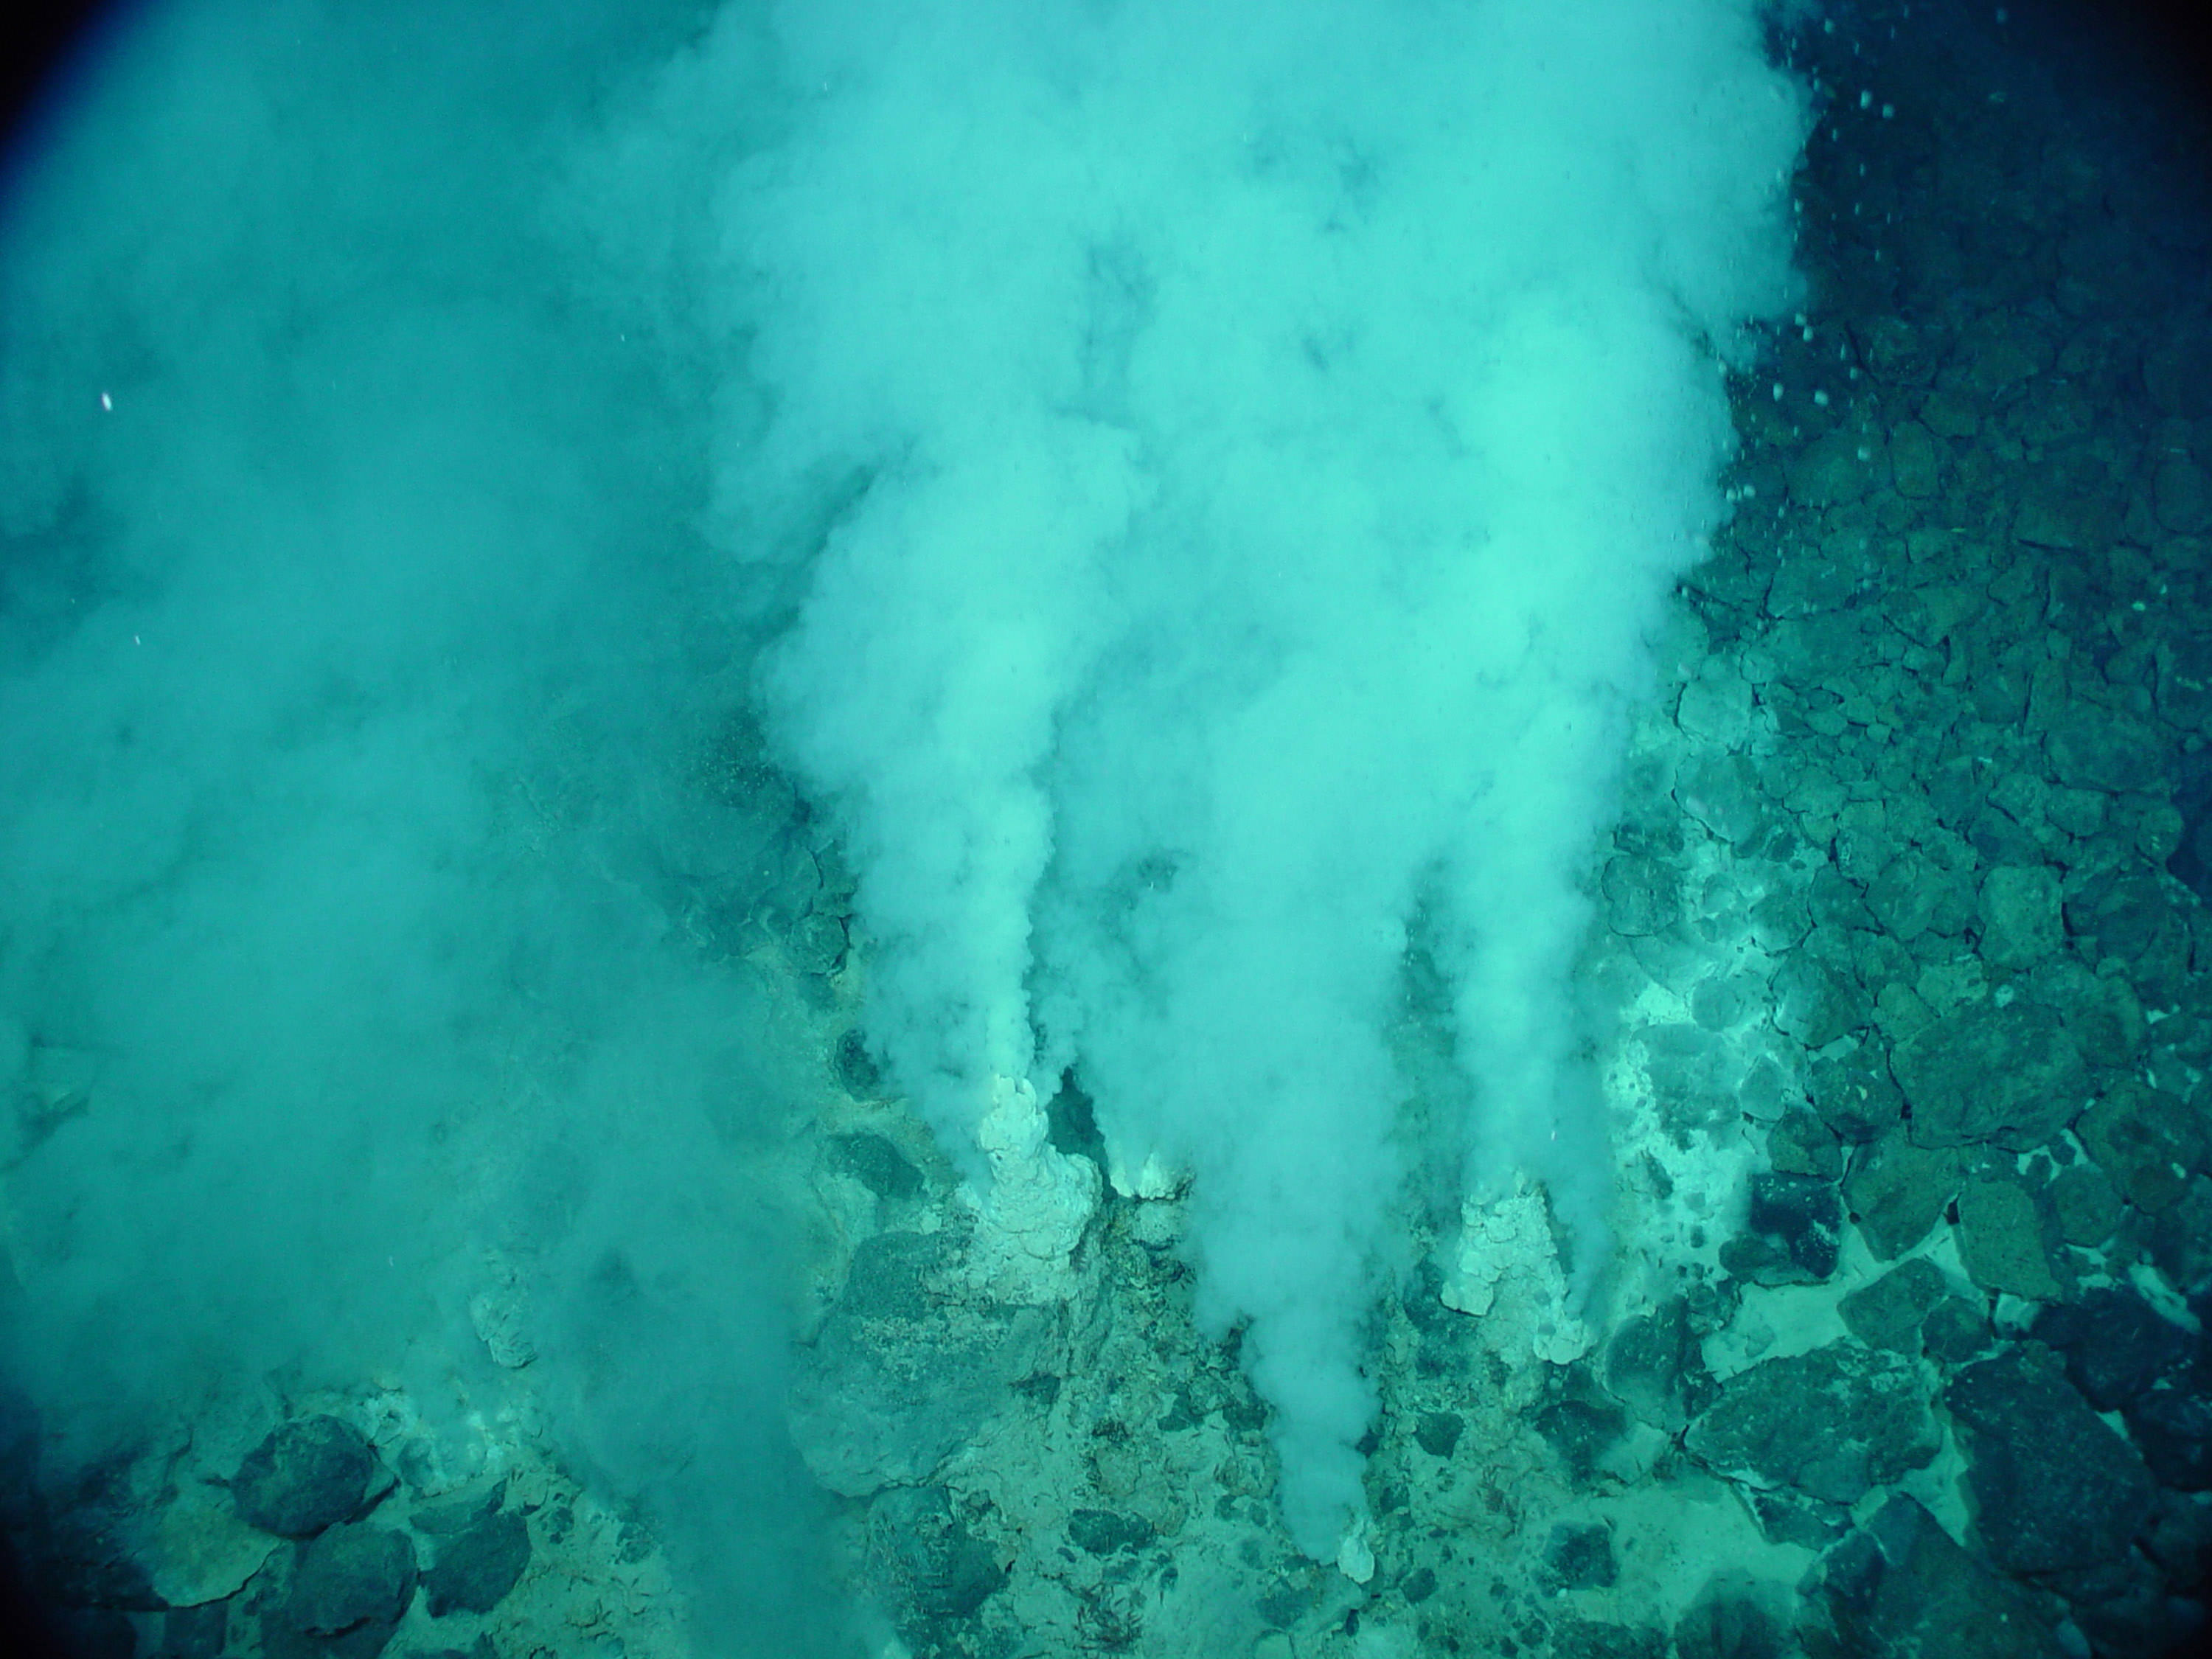 Hydrothermal vents deep in Earth's oceans. Could similar types of vents power the transport of silica and other materials out from Enceladus? Credit: NOAA